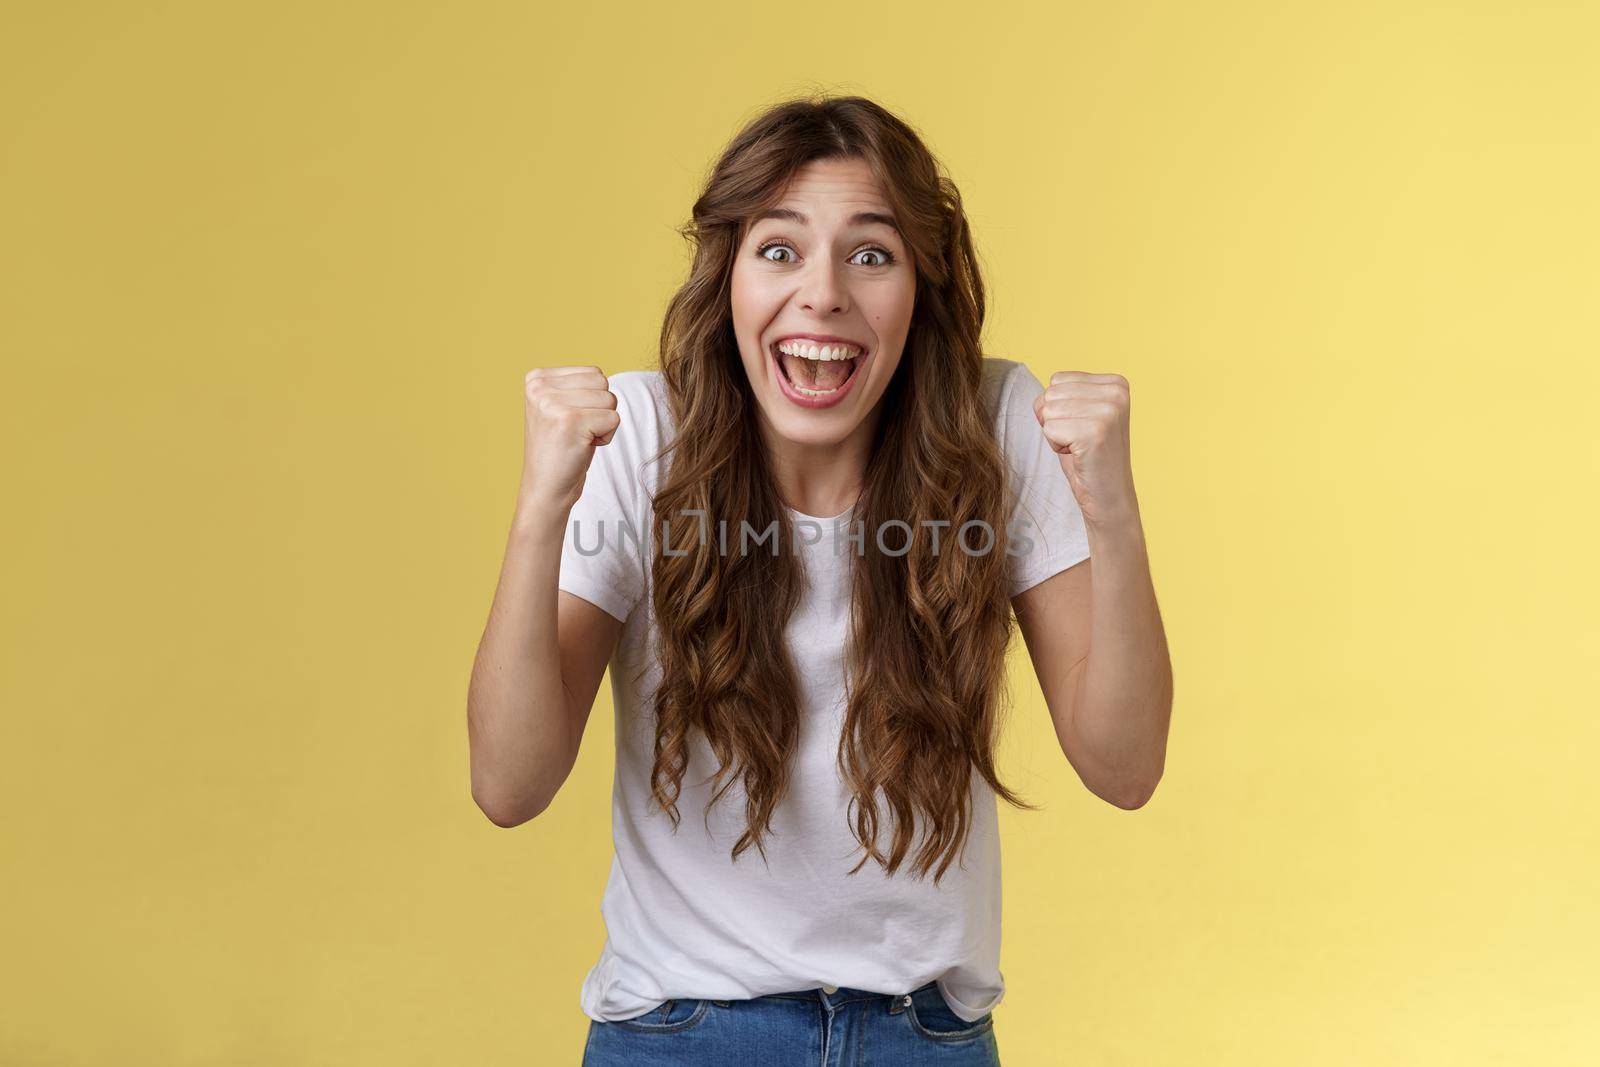 You can do it come on. Excited cheering supportive devoted fan rooting favorite team fist pump clench arms victory triumph gesture smiling broadly look camera excitement joy winning yellow background.